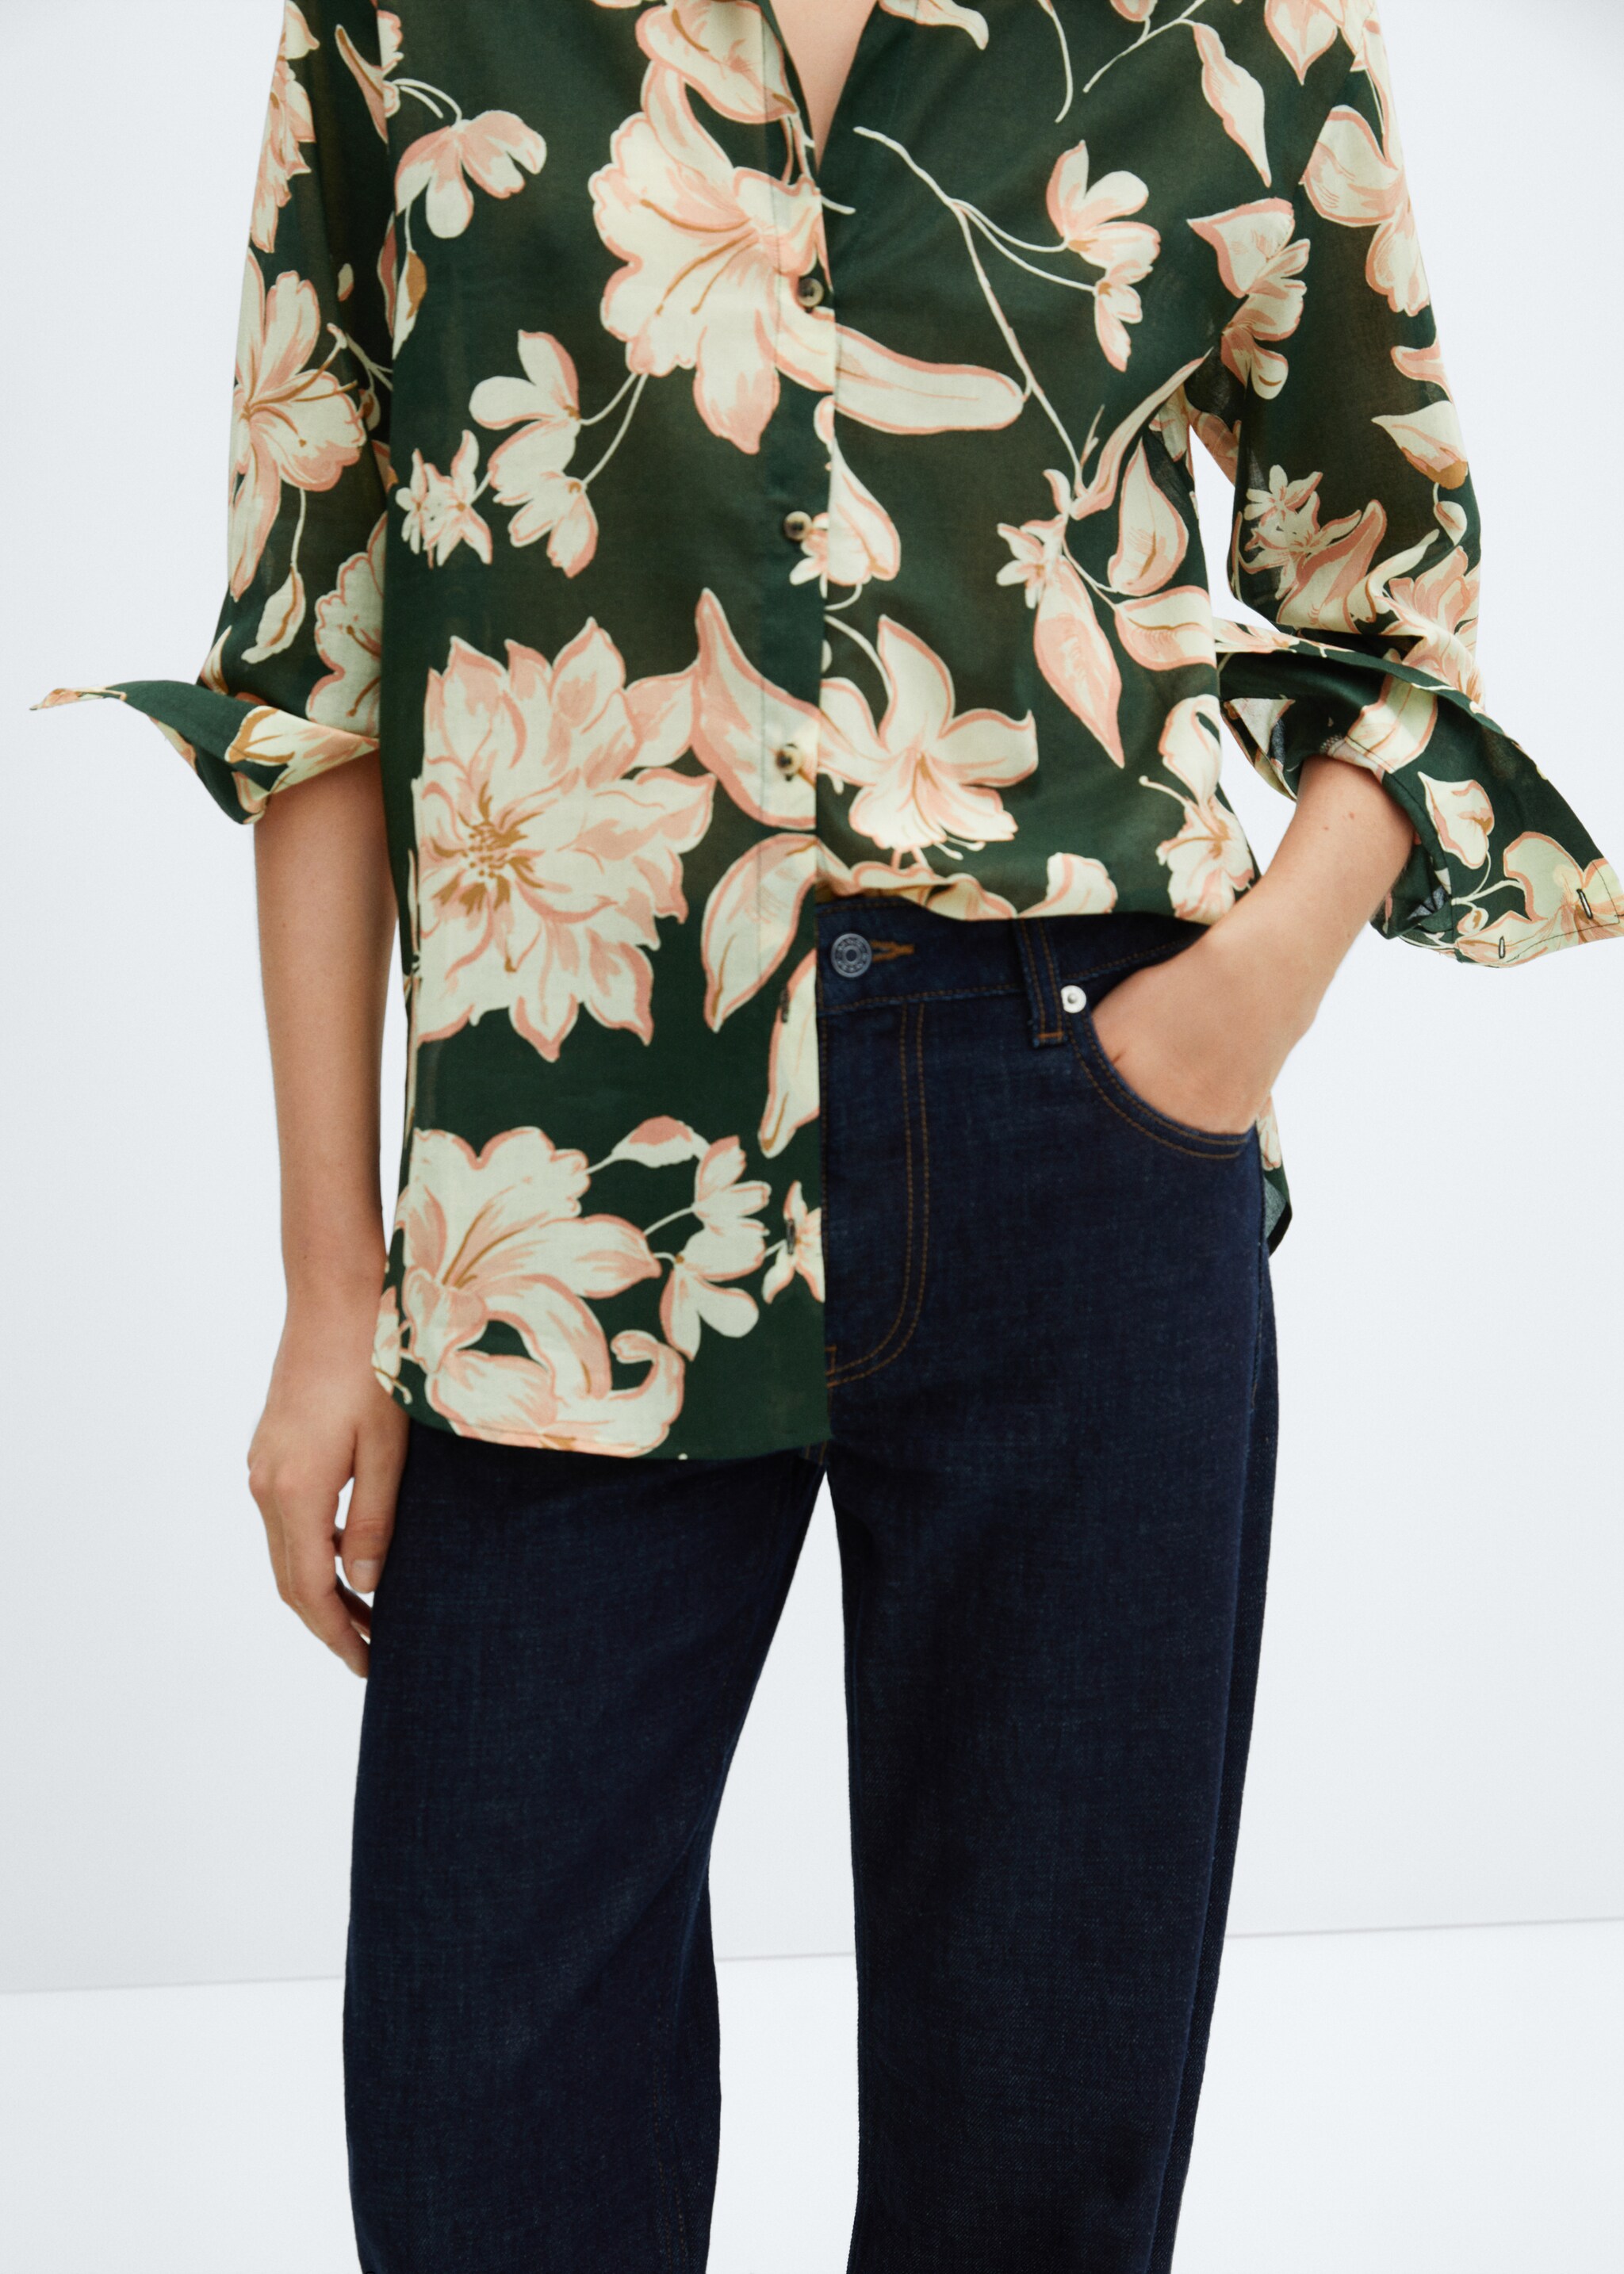 Cotton flower shirt - Details of the article 6